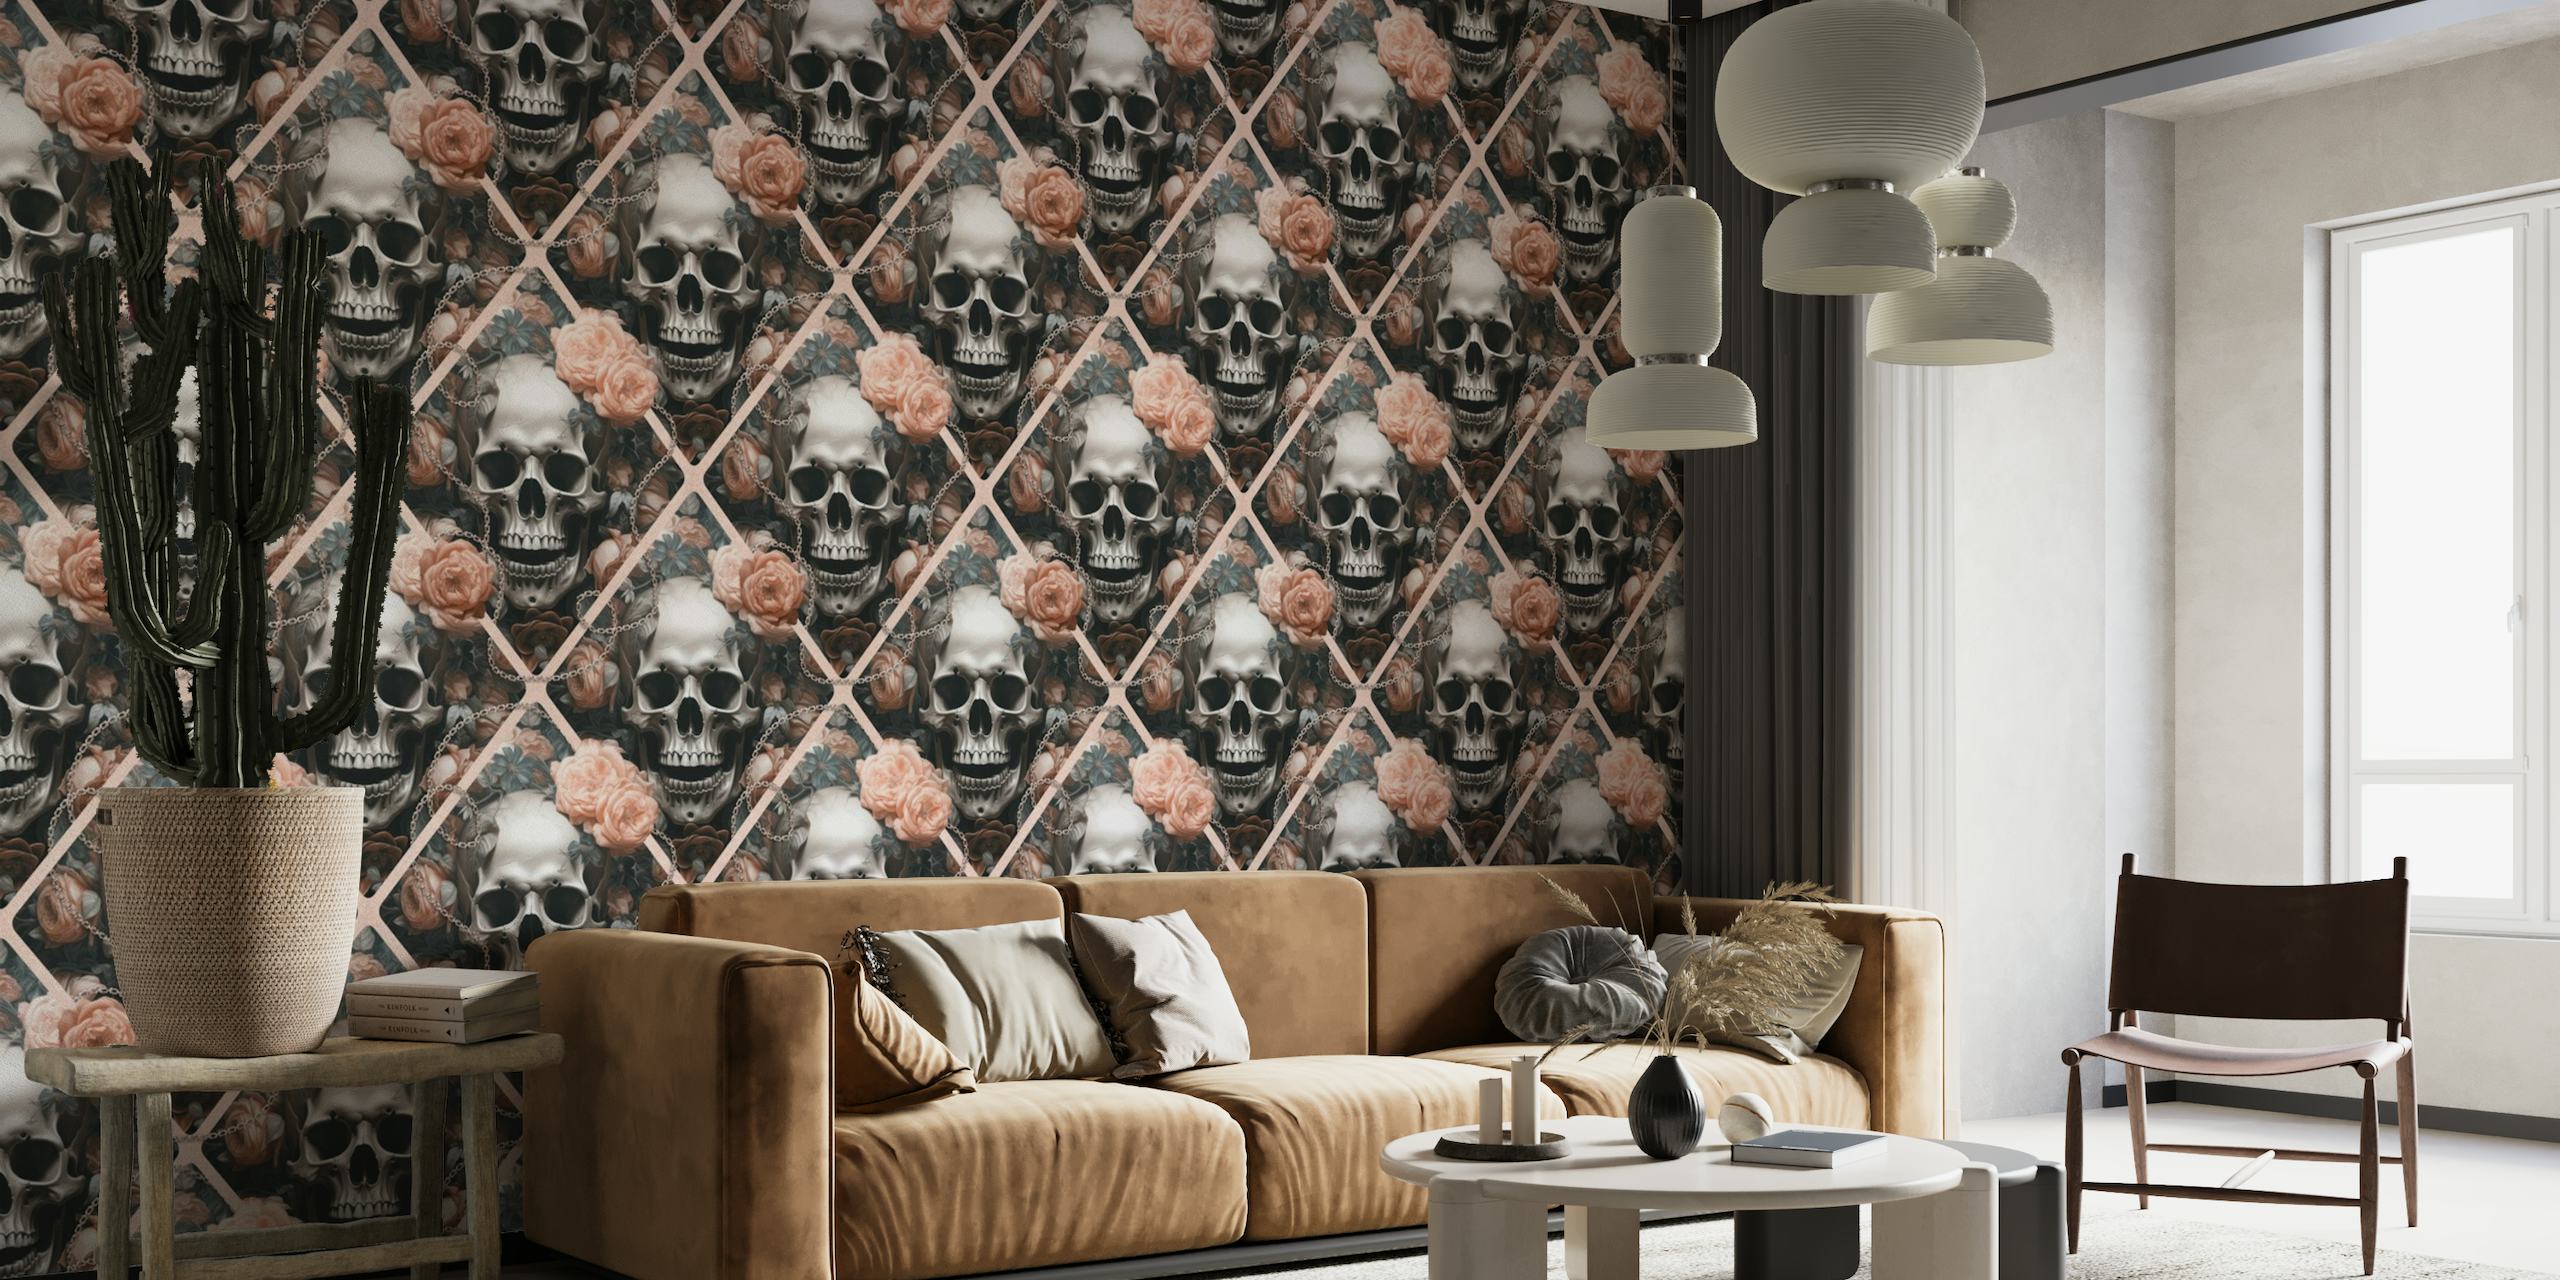 Gothic romance wall mural featuring a pattern of skulls and peach roses